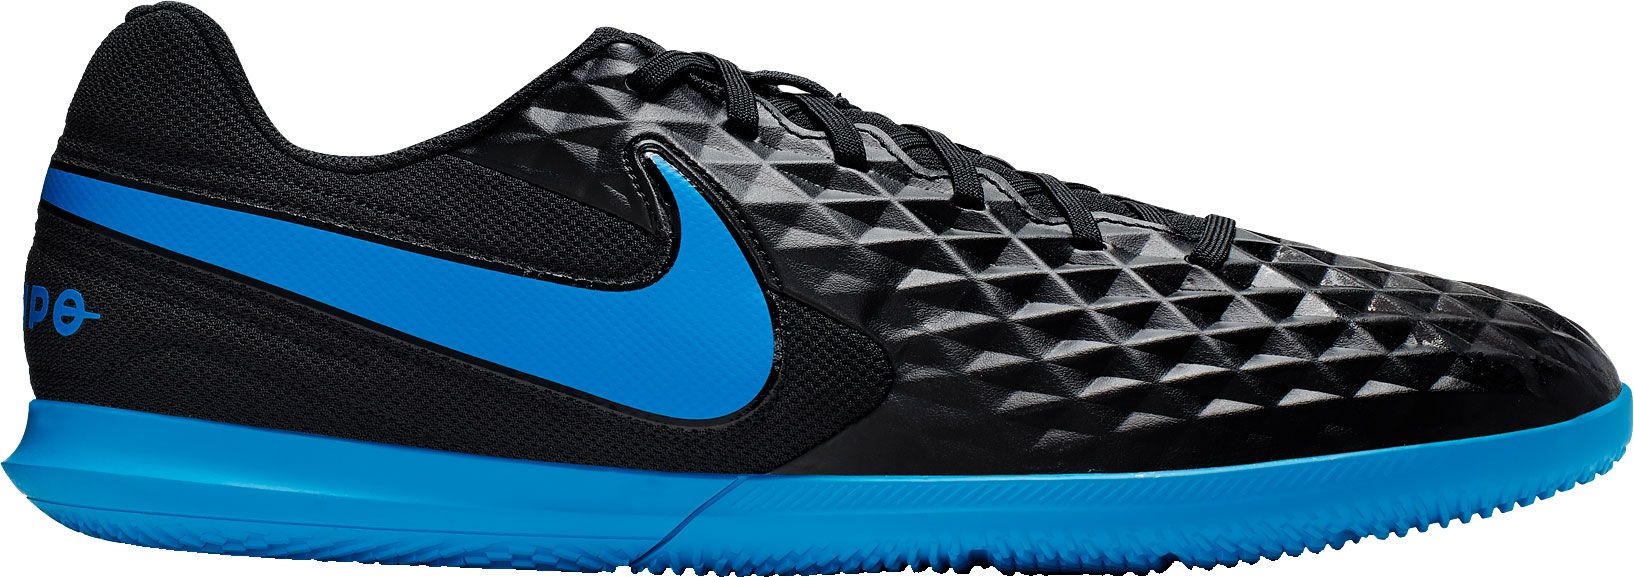 Nike Tiempo Legend 8 Club Indoor Soccer Shoes | DICK'S Sporting Goods